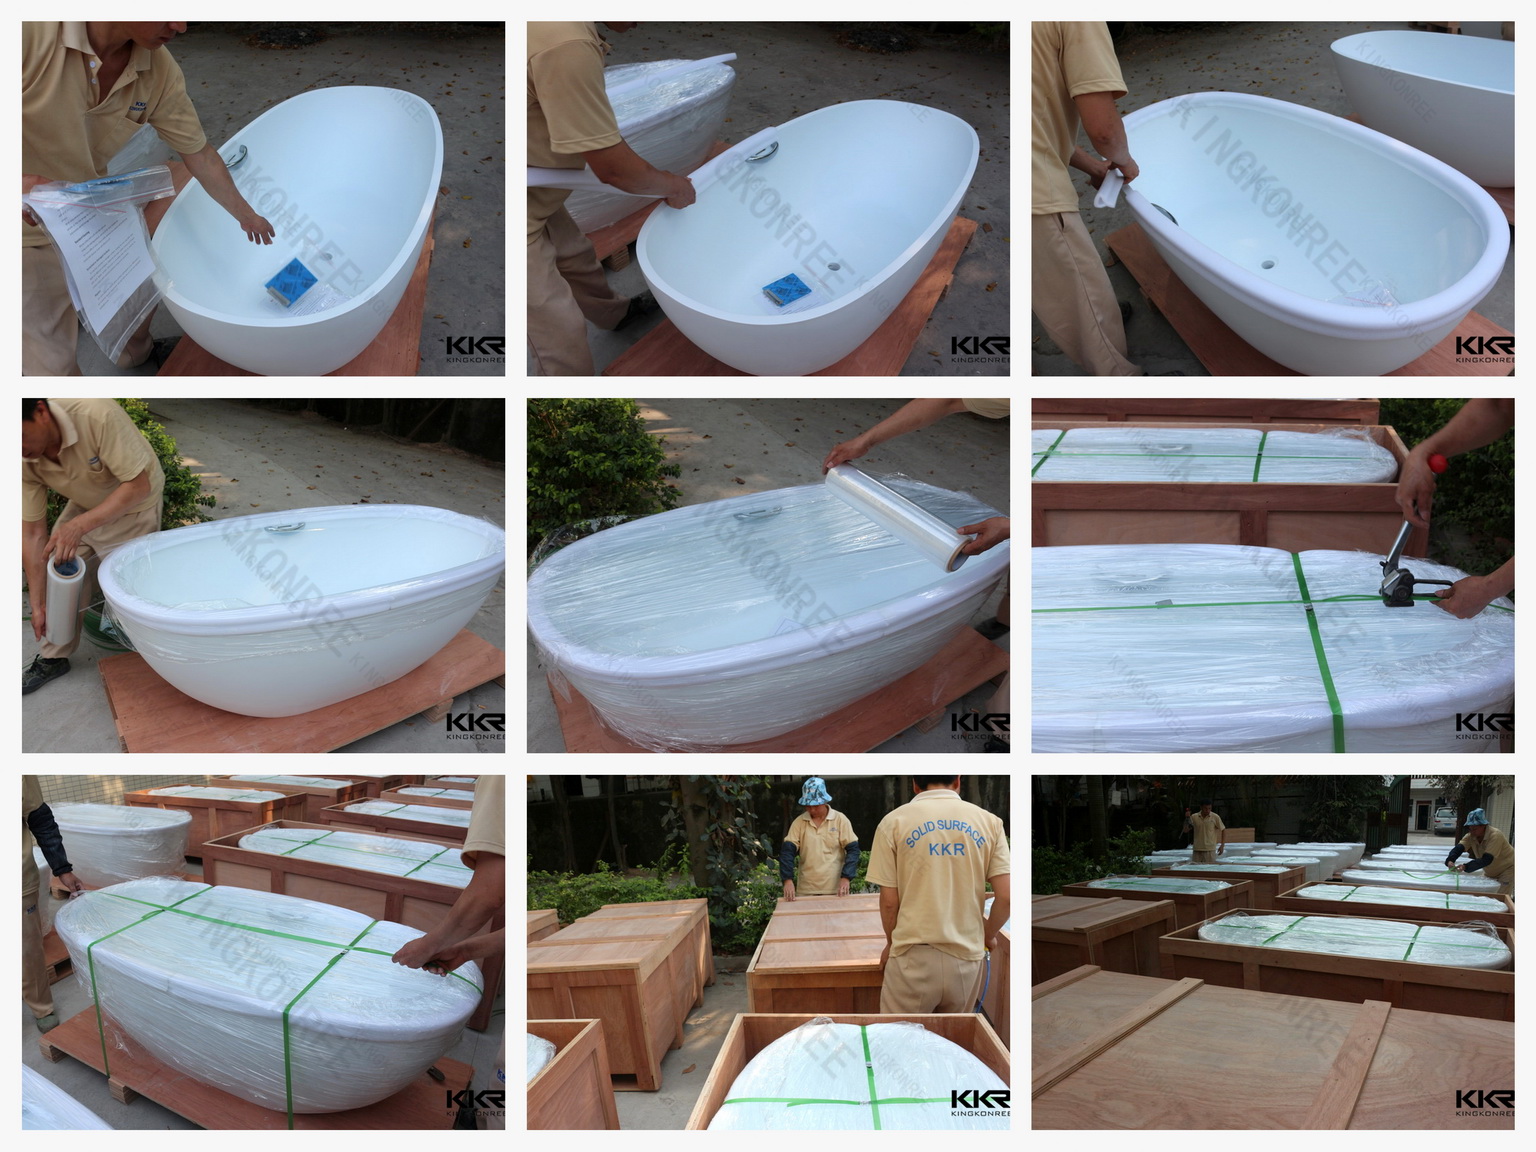 China manufacturer acrylic solid surface freestanding bathtub